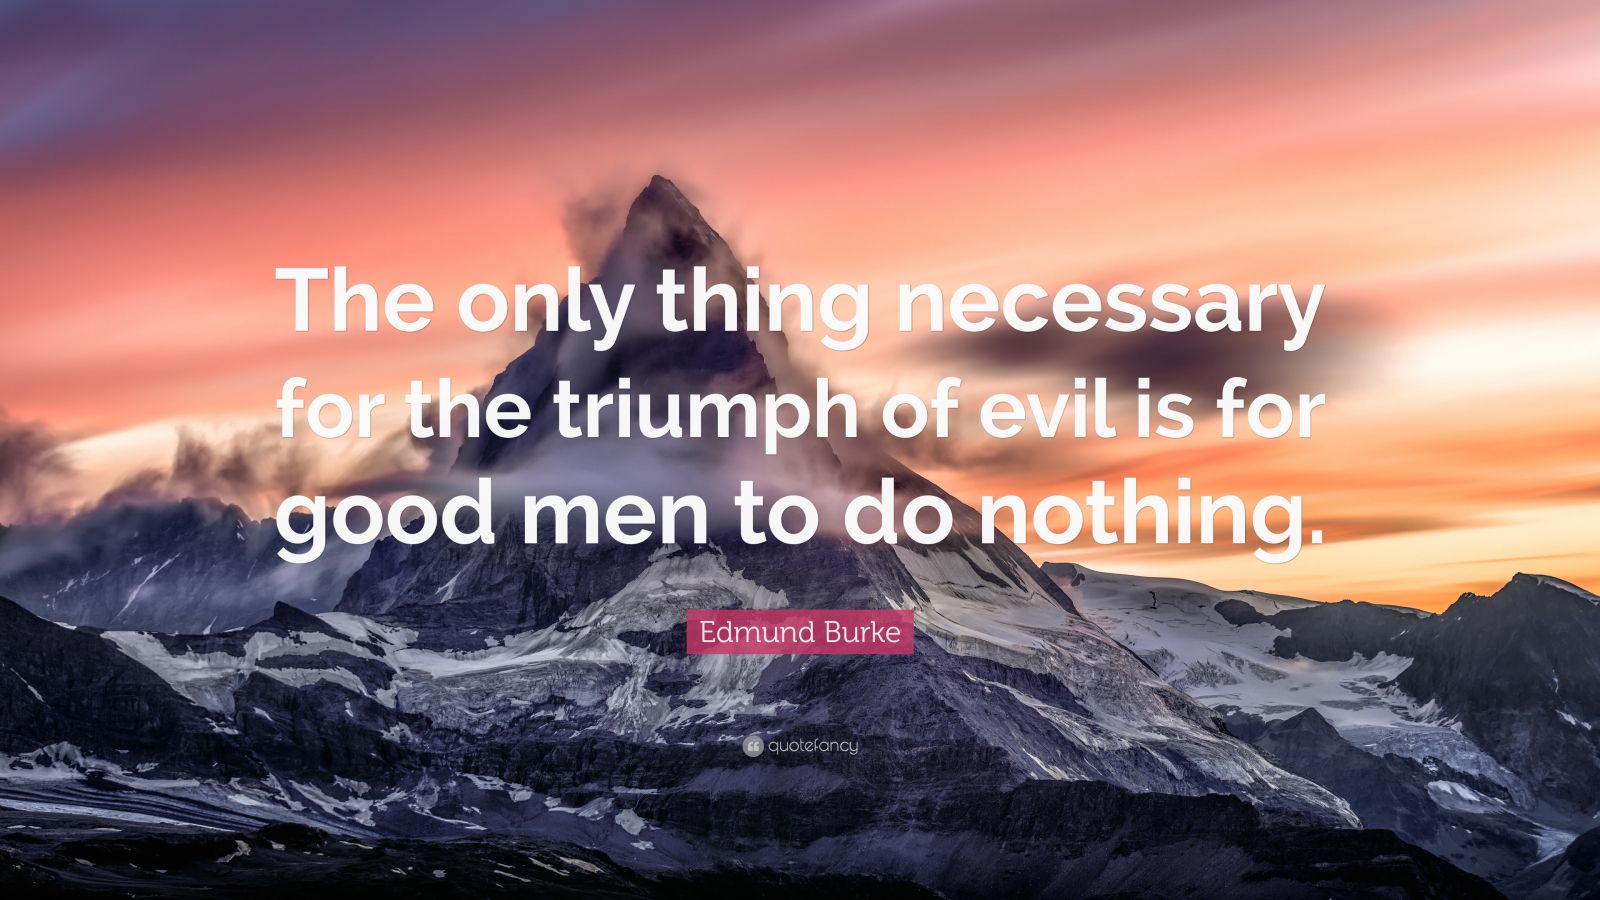 Edmund Burke Quote: “The only thing necessary for the triumph of evil